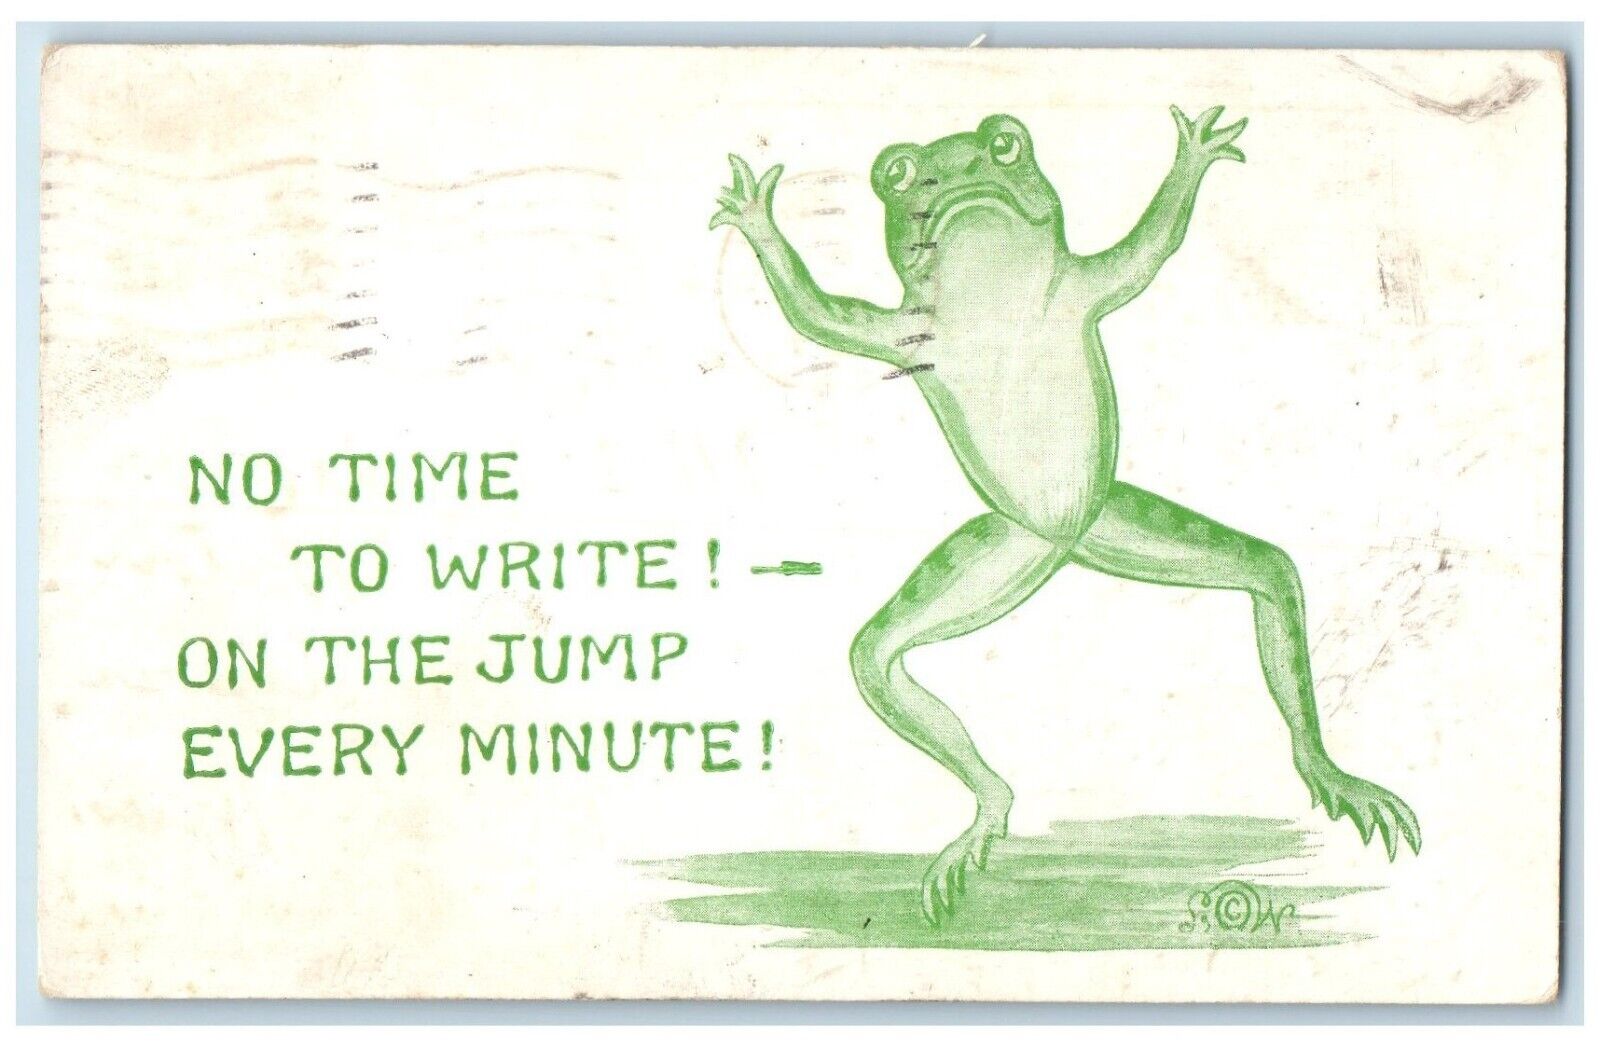 1911 Frog No Time To Write On The Jump Every Minute Topeka KS Antique Postcard